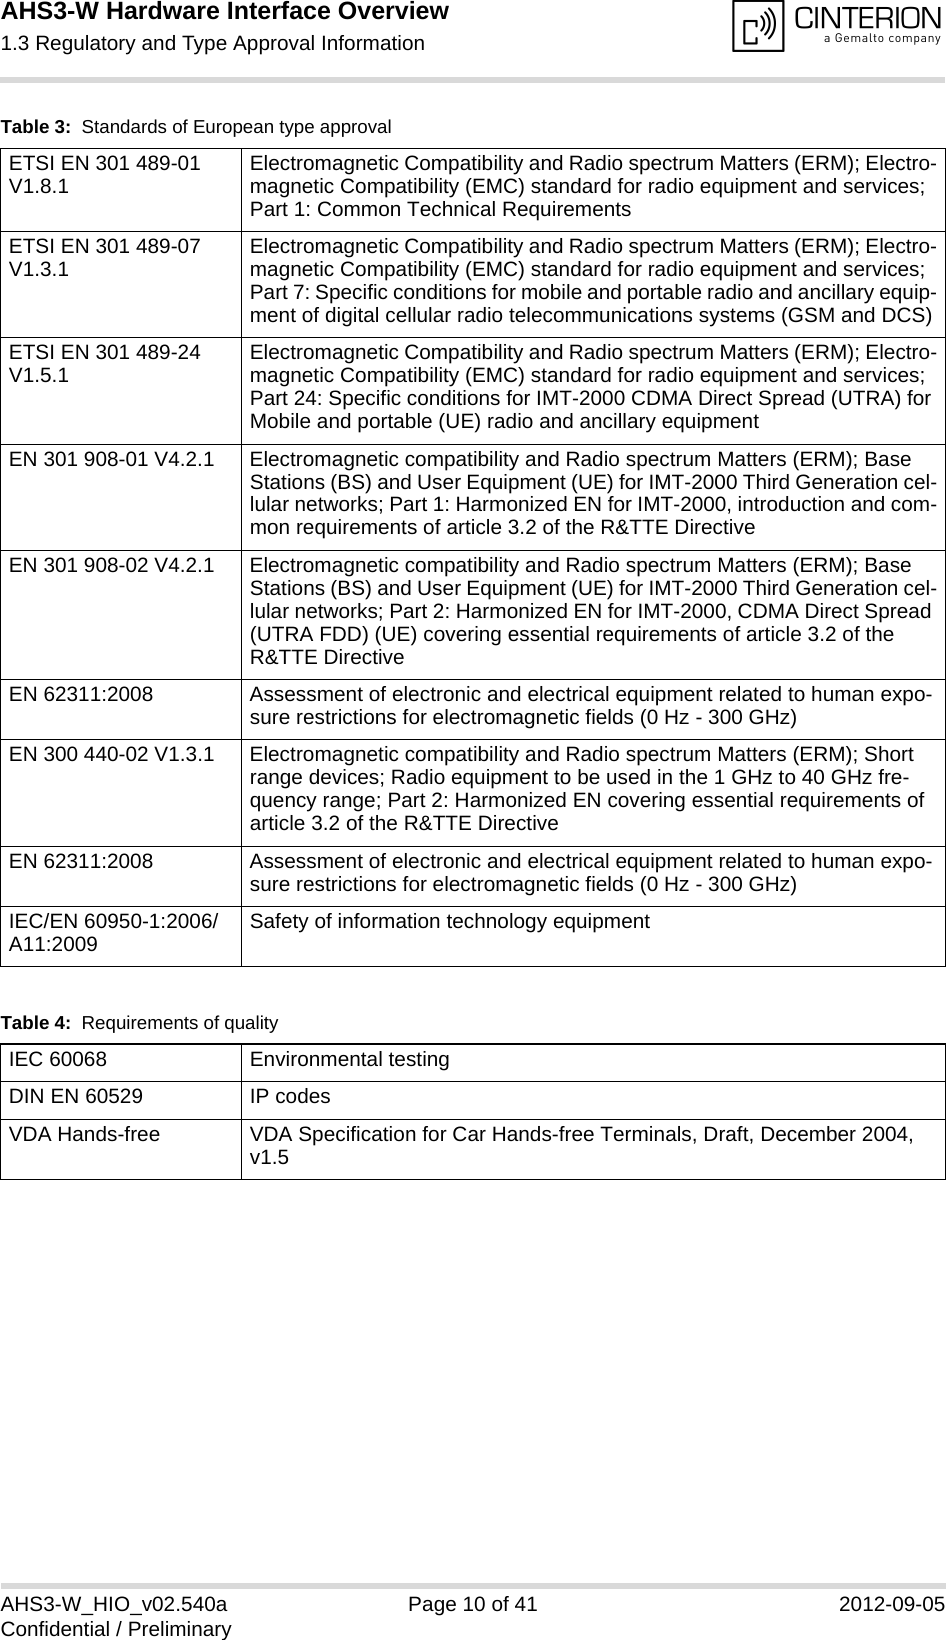 AHS3-W Hardware Interface Overview1.3 Regulatory and Type Approval Information14AHS3-W_HIO_v02.540a Page 10 of 41 2012-09-05Confidential / PreliminaryETSI EN 301 489-01 V1.8.1 Electromagnetic Compatibility and Radio spectrum Matters (ERM); Electro-magnetic Compatibility (EMC) standard for radio equipment and services; Part 1: Common Technical RequirementsETSI EN 301 489-07 V1.3.1 Electromagnetic Compatibility and Radio spectrum Matters (ERM); Electro-magnetic Compatibility (EMC) standard for radio equipment and services; Part 7: Specific conditions for mobile and portable radio and ancillary equip-ment of digital cellular radio telecommunications systems (GSM and DCS)ETSI EN 301 489-24 V1.5.1 Electromagnetic Compatibility and Radio spectrum Matters (ERM); Electro-magnetic Compatibility (EMC) standard for radio equipment and services; Part 24: Specific conditions for IMT-2000 CDMA Direct Spread (UTRA) for Mobile and portable (UE) radio and ancillary equipmentEN 301 908-01 V4.2.1 Electromagnetic compatibility and Radio spectrum Matters (ERM); Base Stations (BS) and User Equipment (UE) for IMT-2000 Third Generation cel-lular networks; Part 1: Harmonized EN for IMT-2000, introduction and com-mon requirements of article 3.2 of the R&amp;TTE DirectiveEN 301 908-02 V4.2.1 Electromagnetic compatibility and Radio spectrum Matters (ERM); Base Stations (BS) and User Equipment (UE) for IMT-2000 Third Generation cel-lular networks; Part 2: Harmonized EN for IMT-2000, CDMA Direct Spread (UTRA FDD) (UE) covering essential requirements of article 3.2 of the R&amp;TTE DirectiveEN 62311:2008 Assessment of electronic and electrical equipment related to human expo-sure restrictions for electromagnetic fields (0 Hz - 300 GHz)EN 300 440-02 V1.3.1  Electromagnetic compatibility and Radio spectrum Matters (ERM); Short range devices; Radio equipment to be used in the 1 GHz to 40 GHz fre-quency range; Part 2: Harmonized EN covering essential requirements of article 3.2 of the R&amp;TTE DirectiveEN 62311:2008 Assessment of electronic and electrical equipment related to human expo-sure restrictions for electromagnetic fields (0 Hz - 300 GHz)IEC/EN 60950-1:2006/A11:2009 Safety of information technology equipmentTable 4:  Requirements of qualityIEC 60068 Environmental testingDIN EN 60529 IP codesVDA Hands-free  VDA Specification for Car Hands-free Terminals, Draft, December 2004, v1.5Table 3:  Standards of European type approval